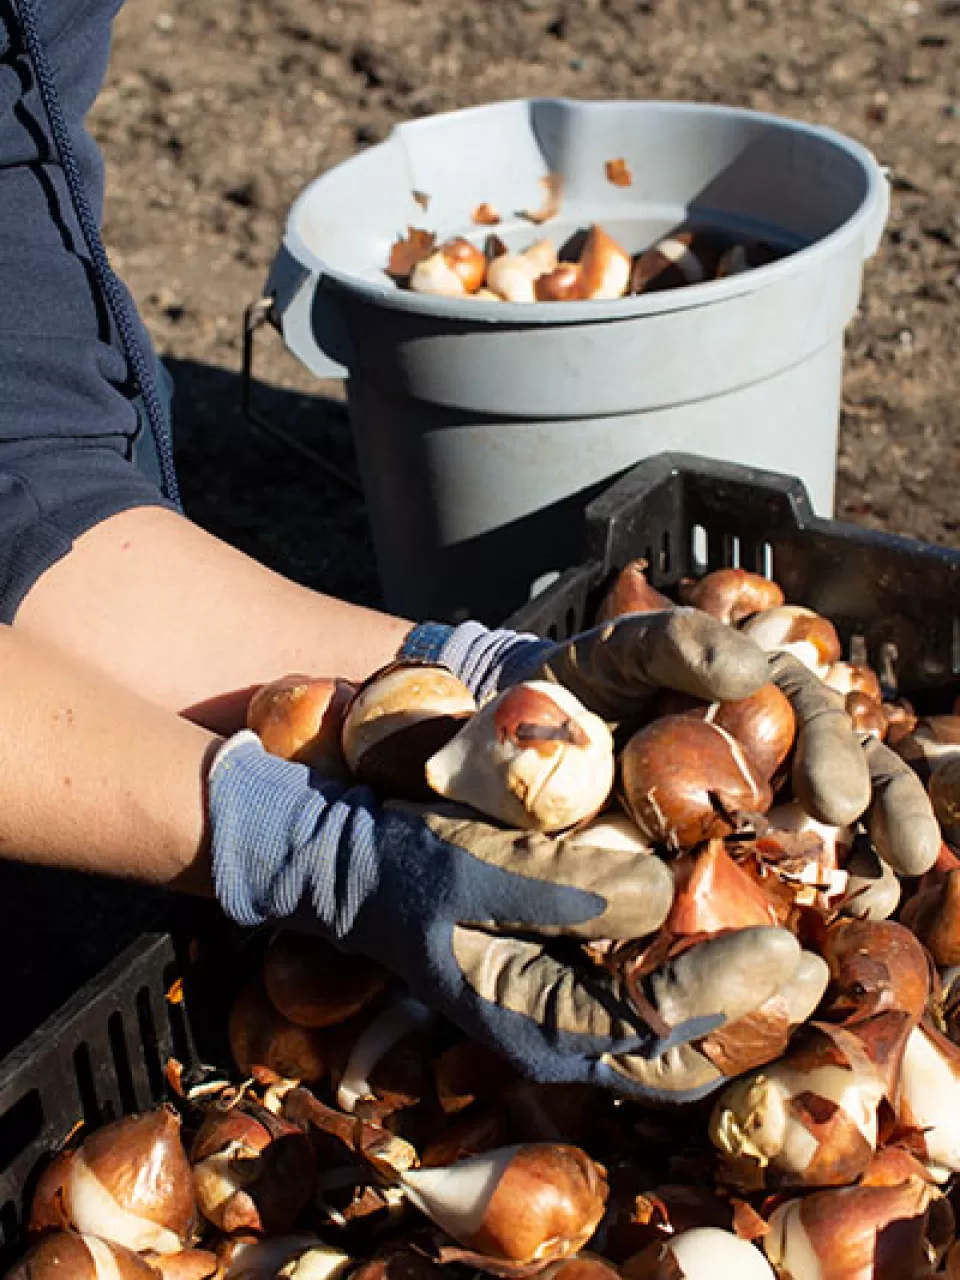 AOC Capitol Grounds and Arboretum planting bulbs during the autumn season.